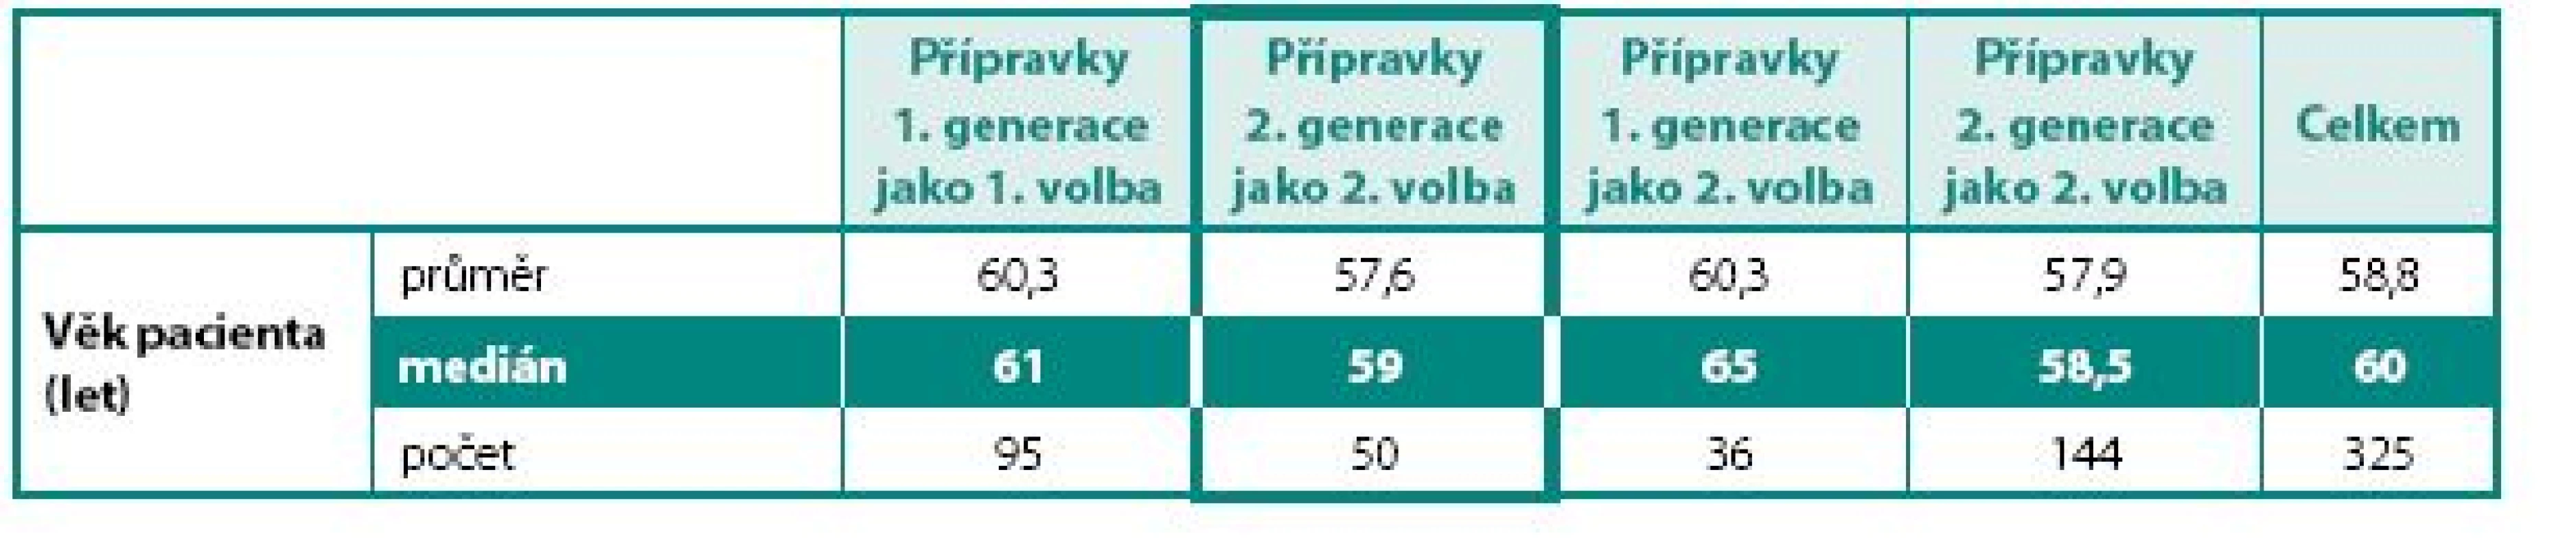 Volba anticholinergika v závislosti na věku pacientů
Table 2. Choice of antimuscarinic for the treatment of OAB according to age of patients